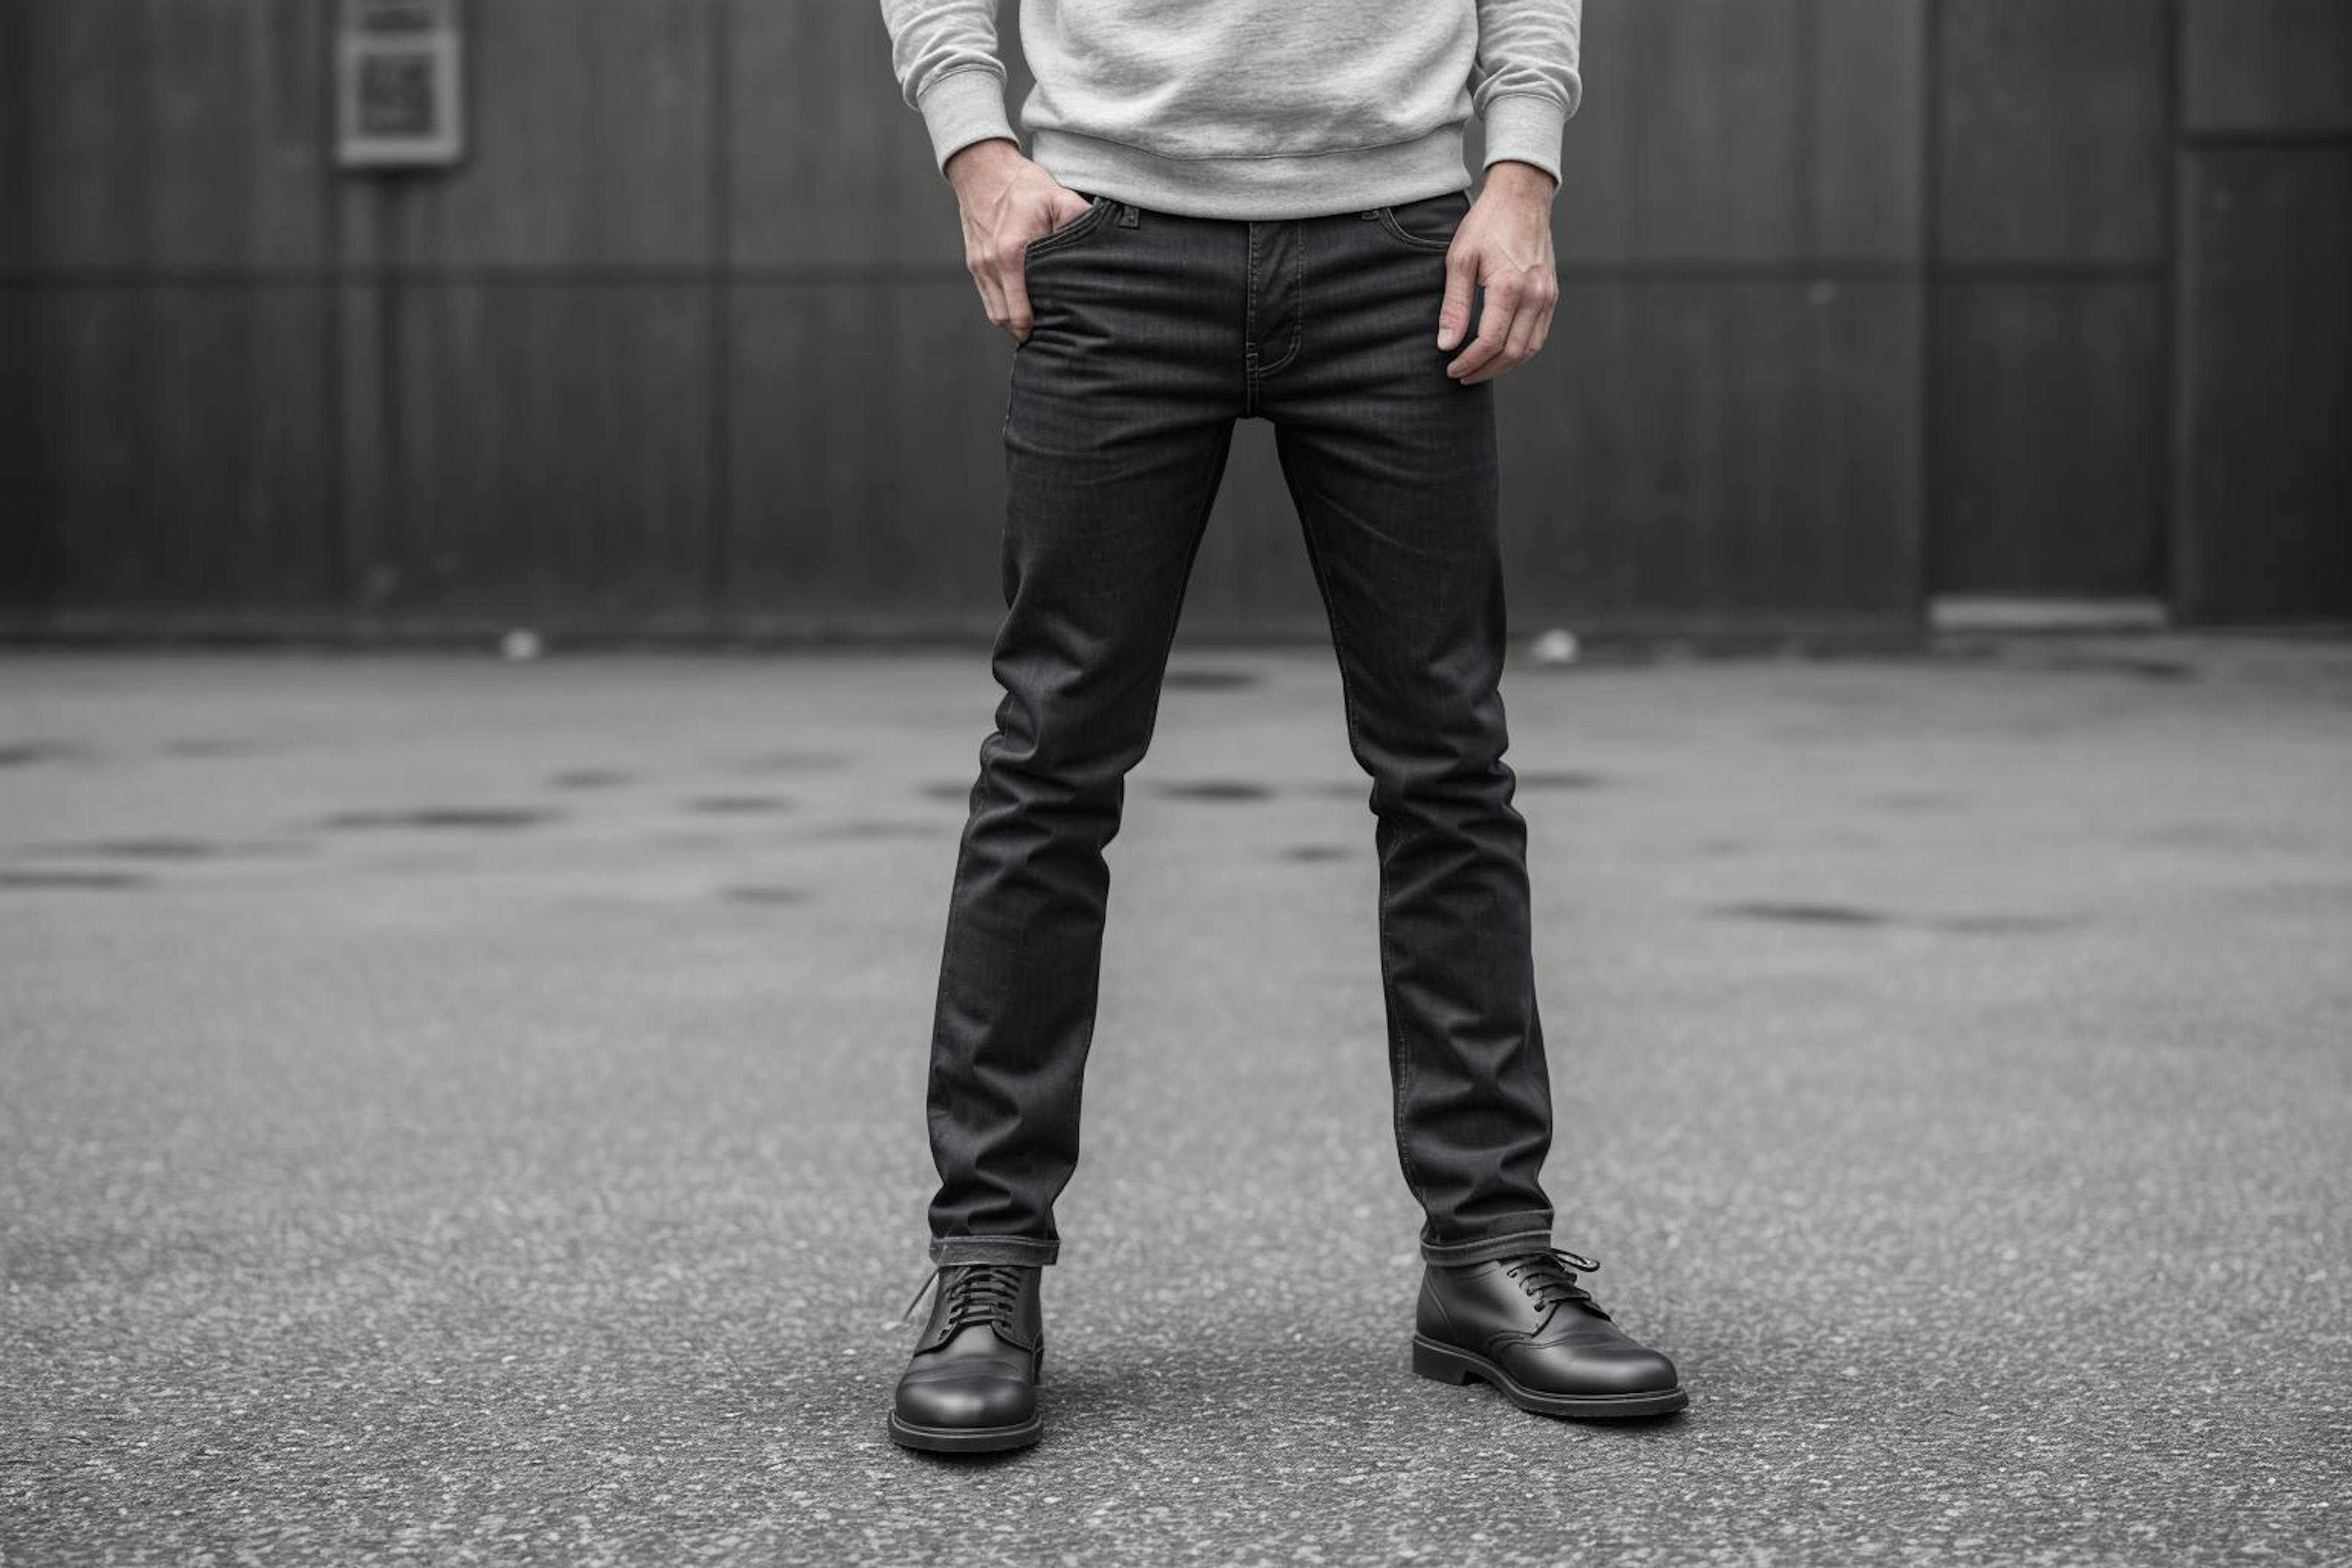 The lower half of a man wearing black jeans and black boots